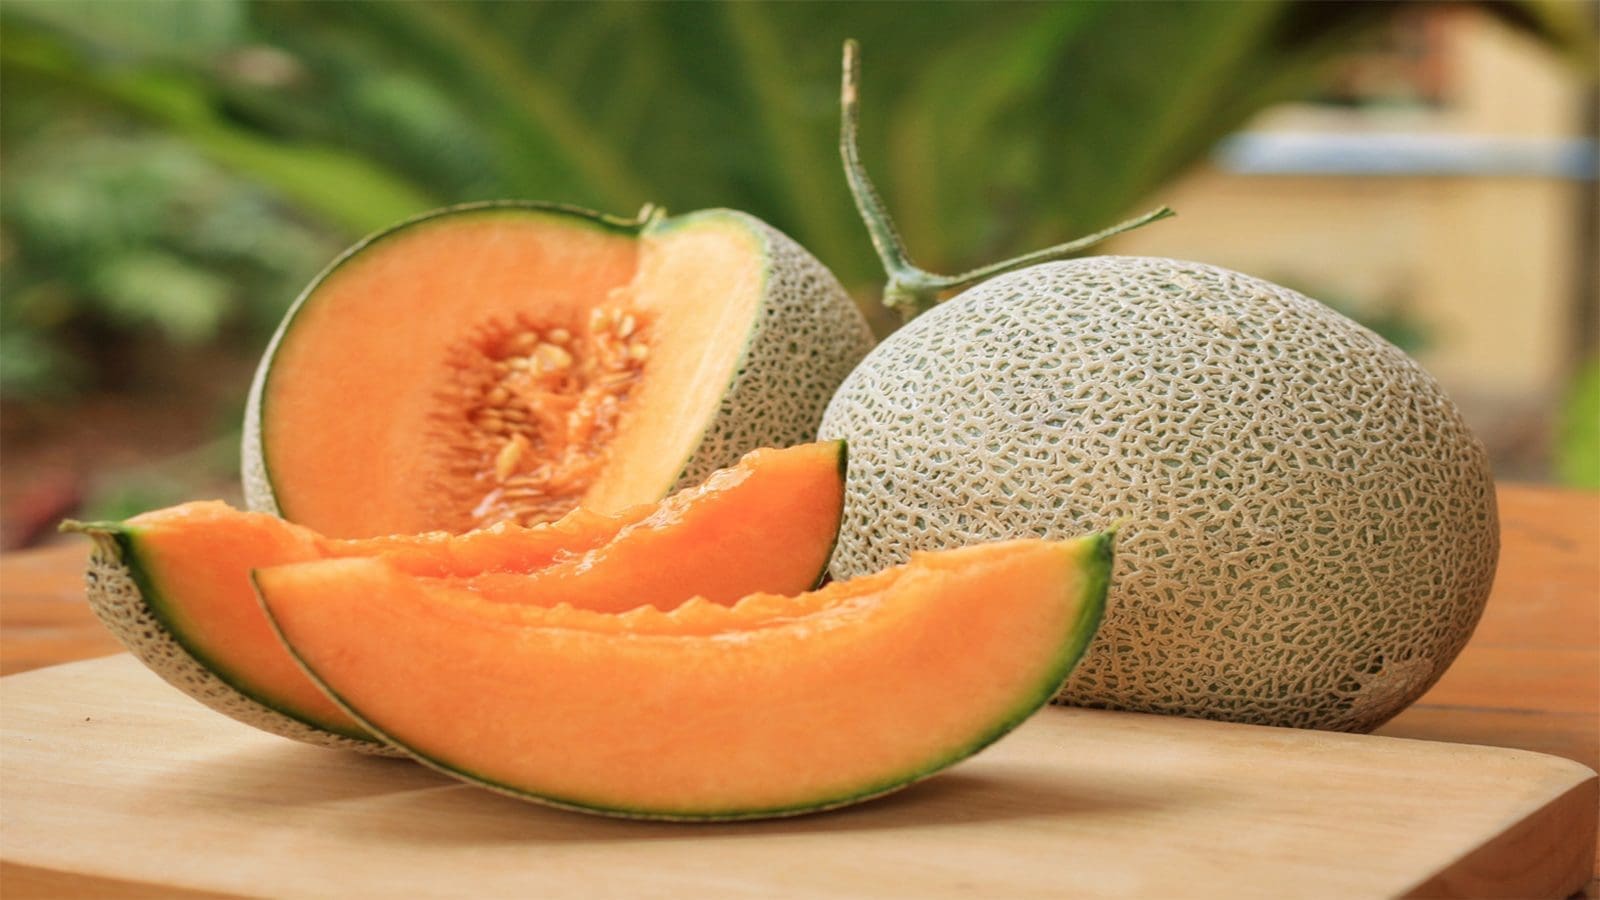 FDA releases report on 2022 Salmonella outbreak linked to Cantaloupe